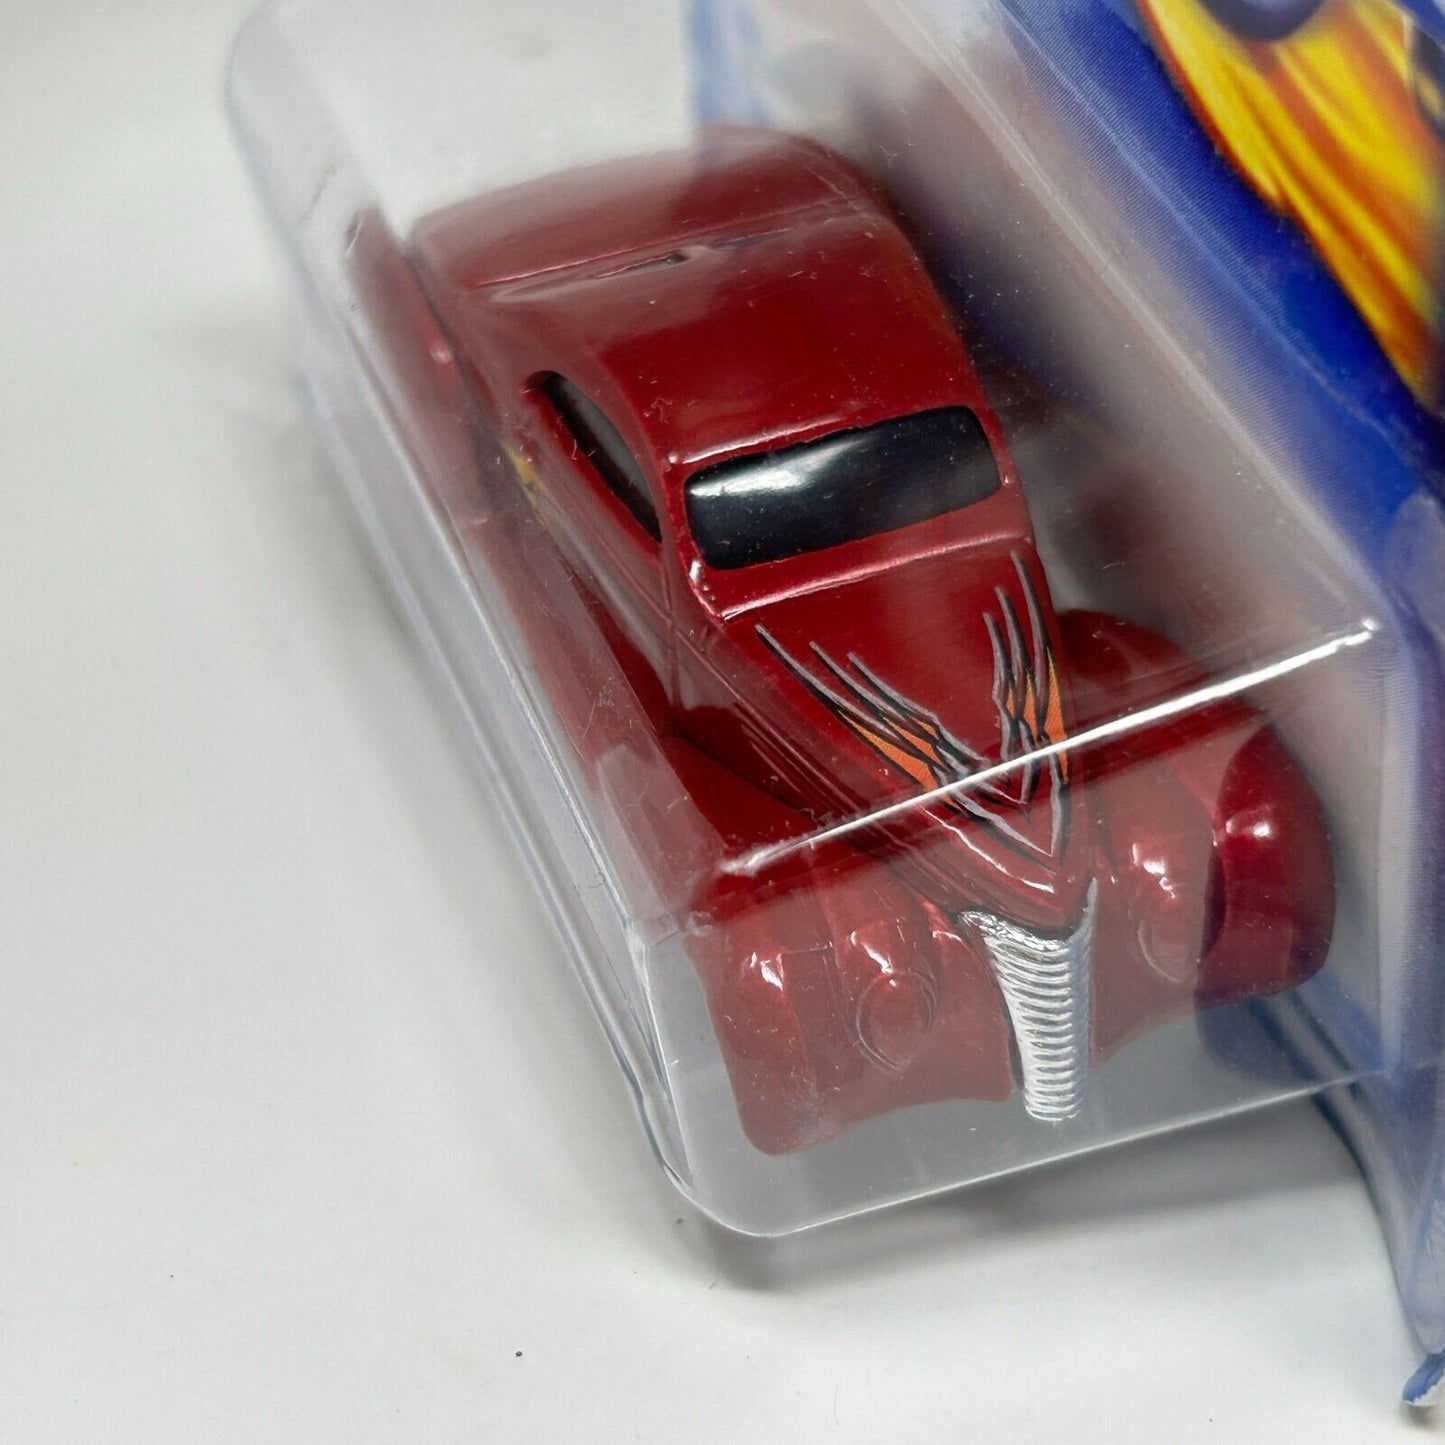 Swoop Coupe Hot Wheels Diecast Car 1937 Lincoln Zephyr Red Vintage 2003 New